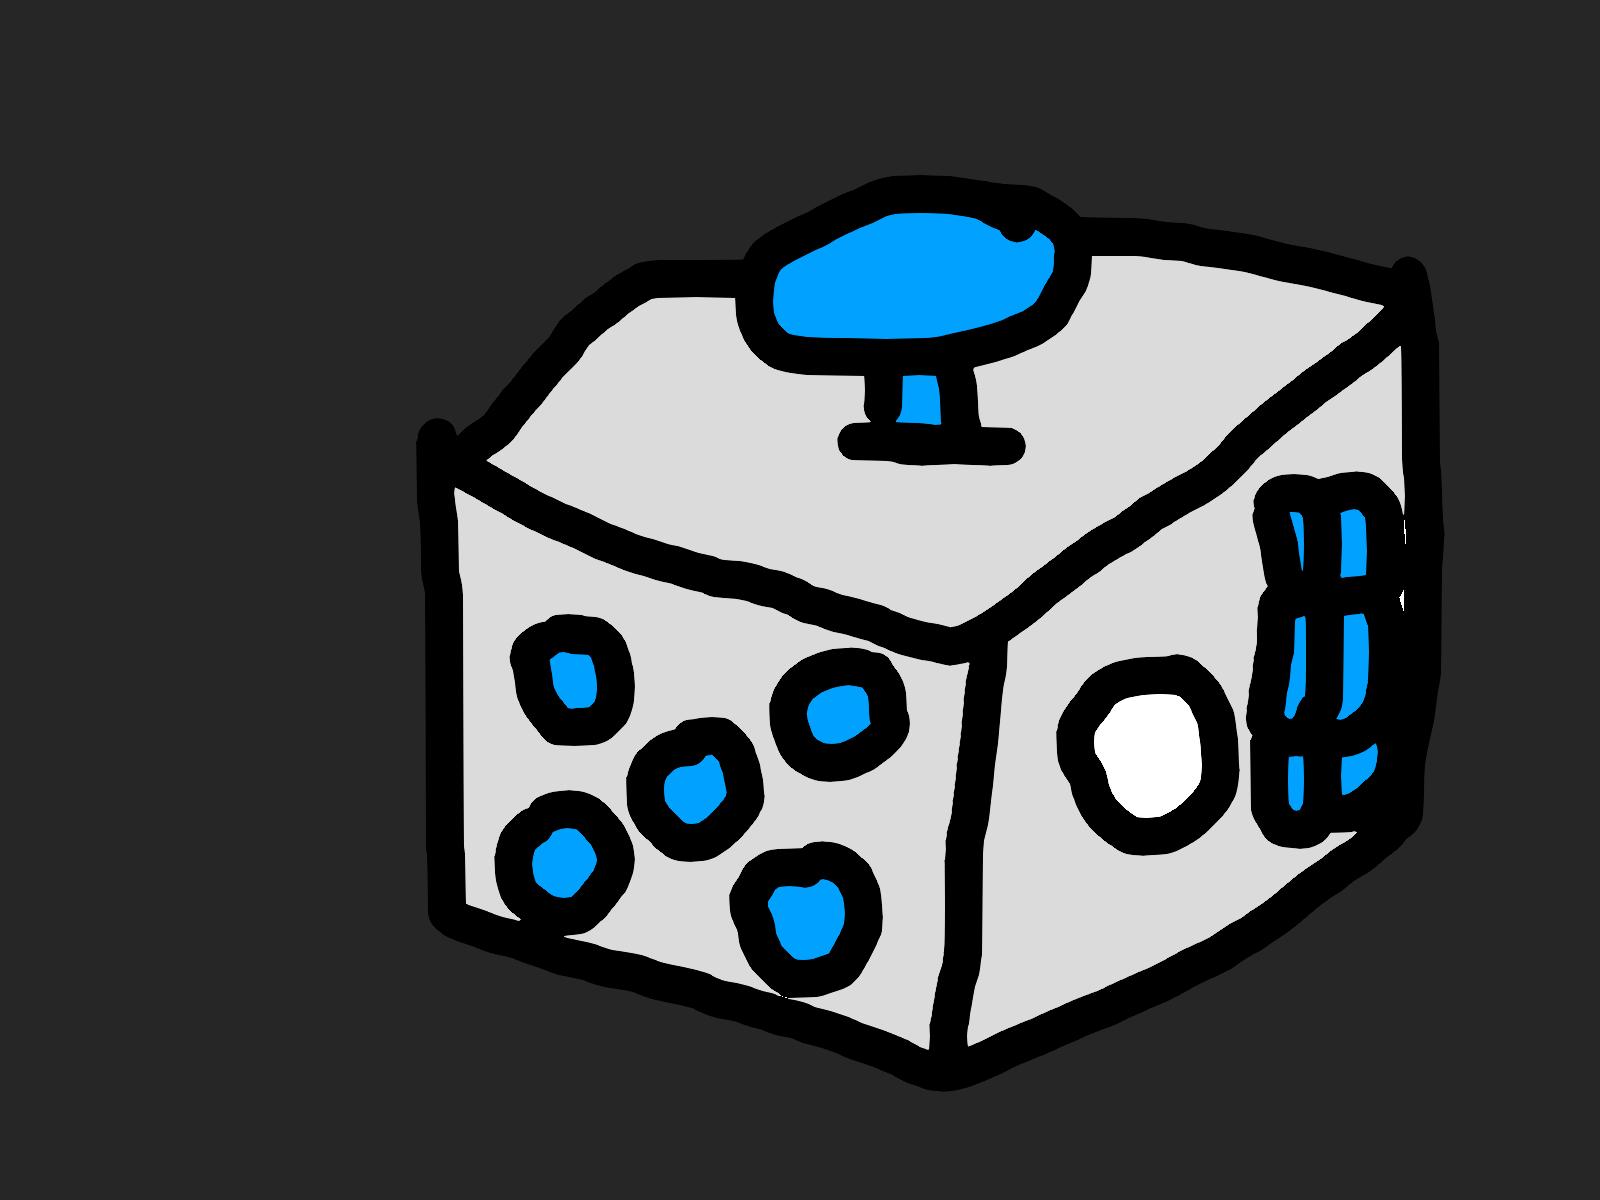 The Fidget Cube By Mikeeddyadmirer89